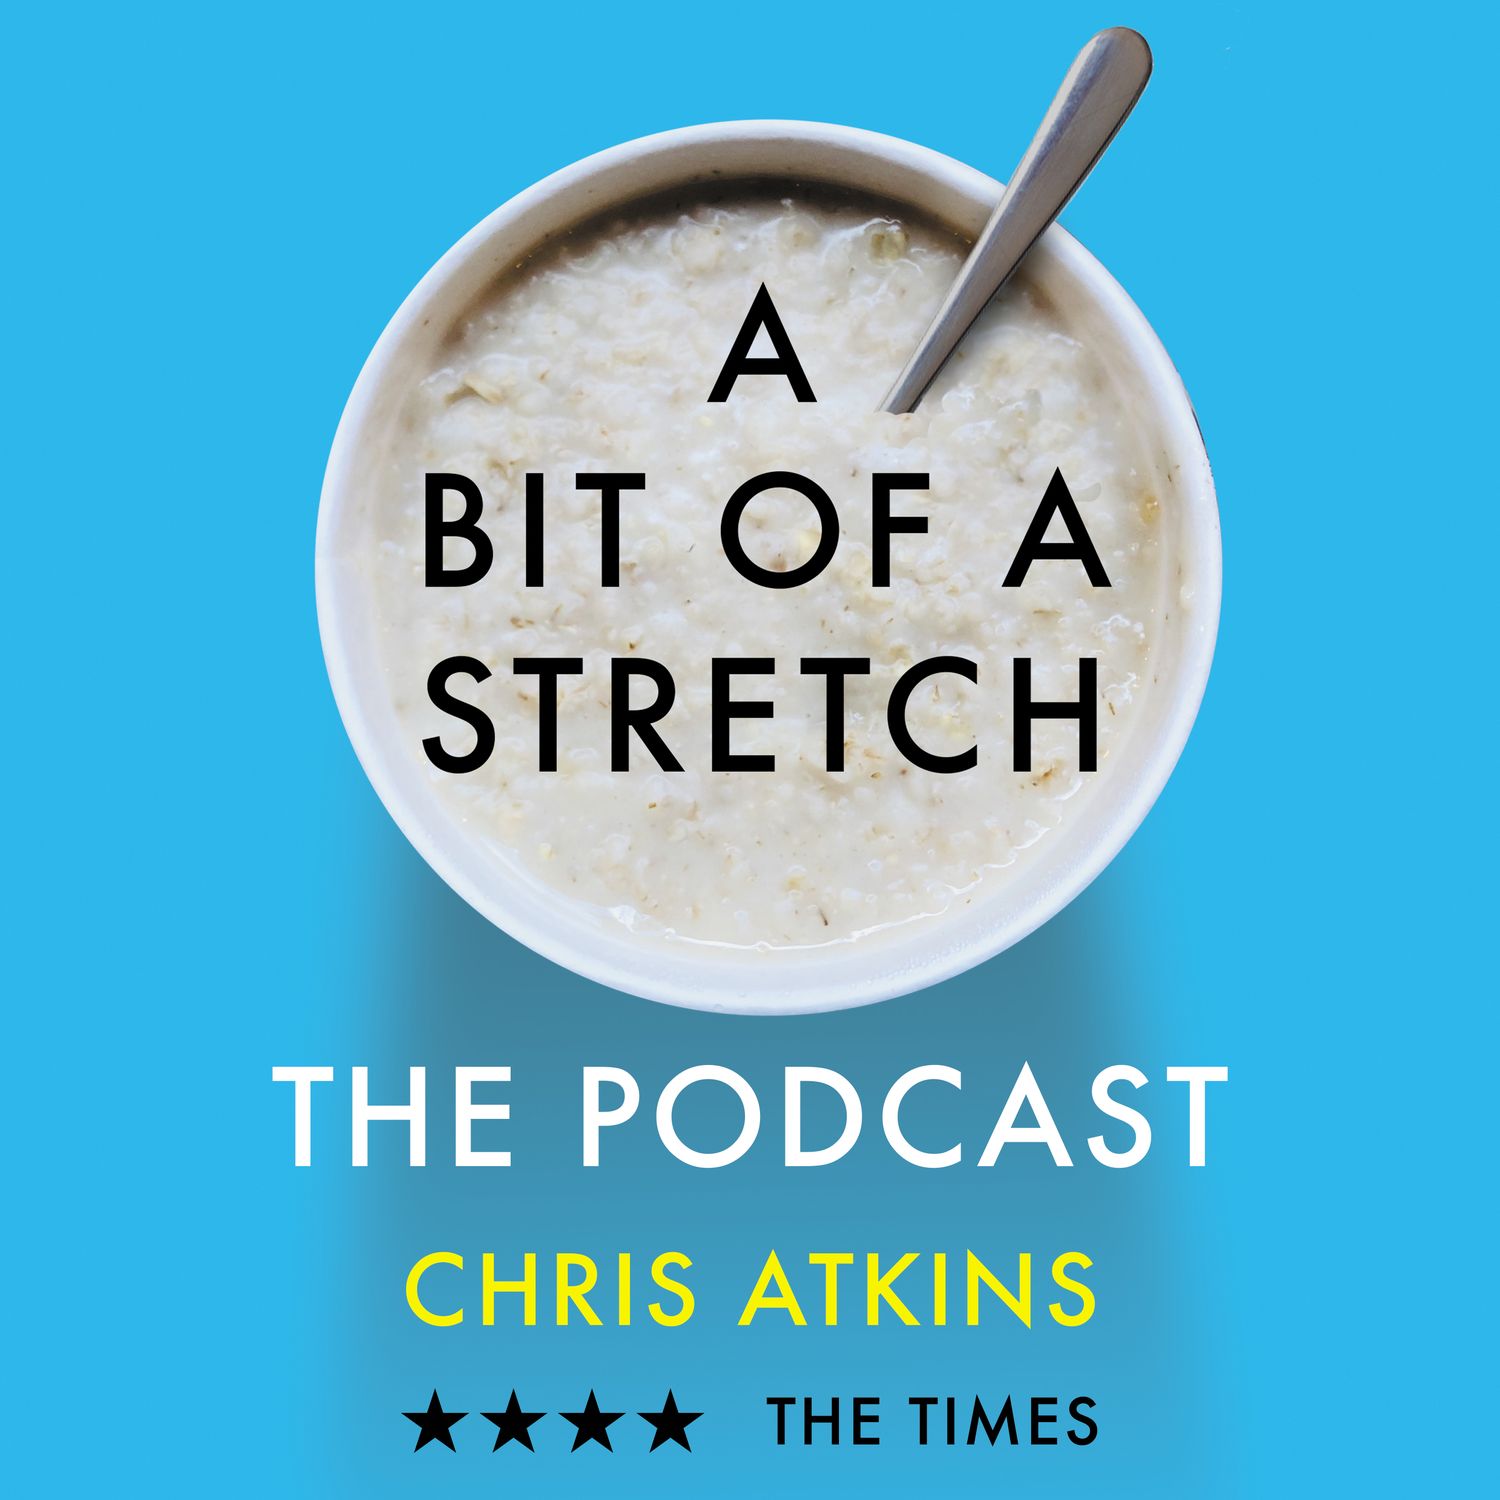 A Bit of a Stretch - The Podcast podcast show image